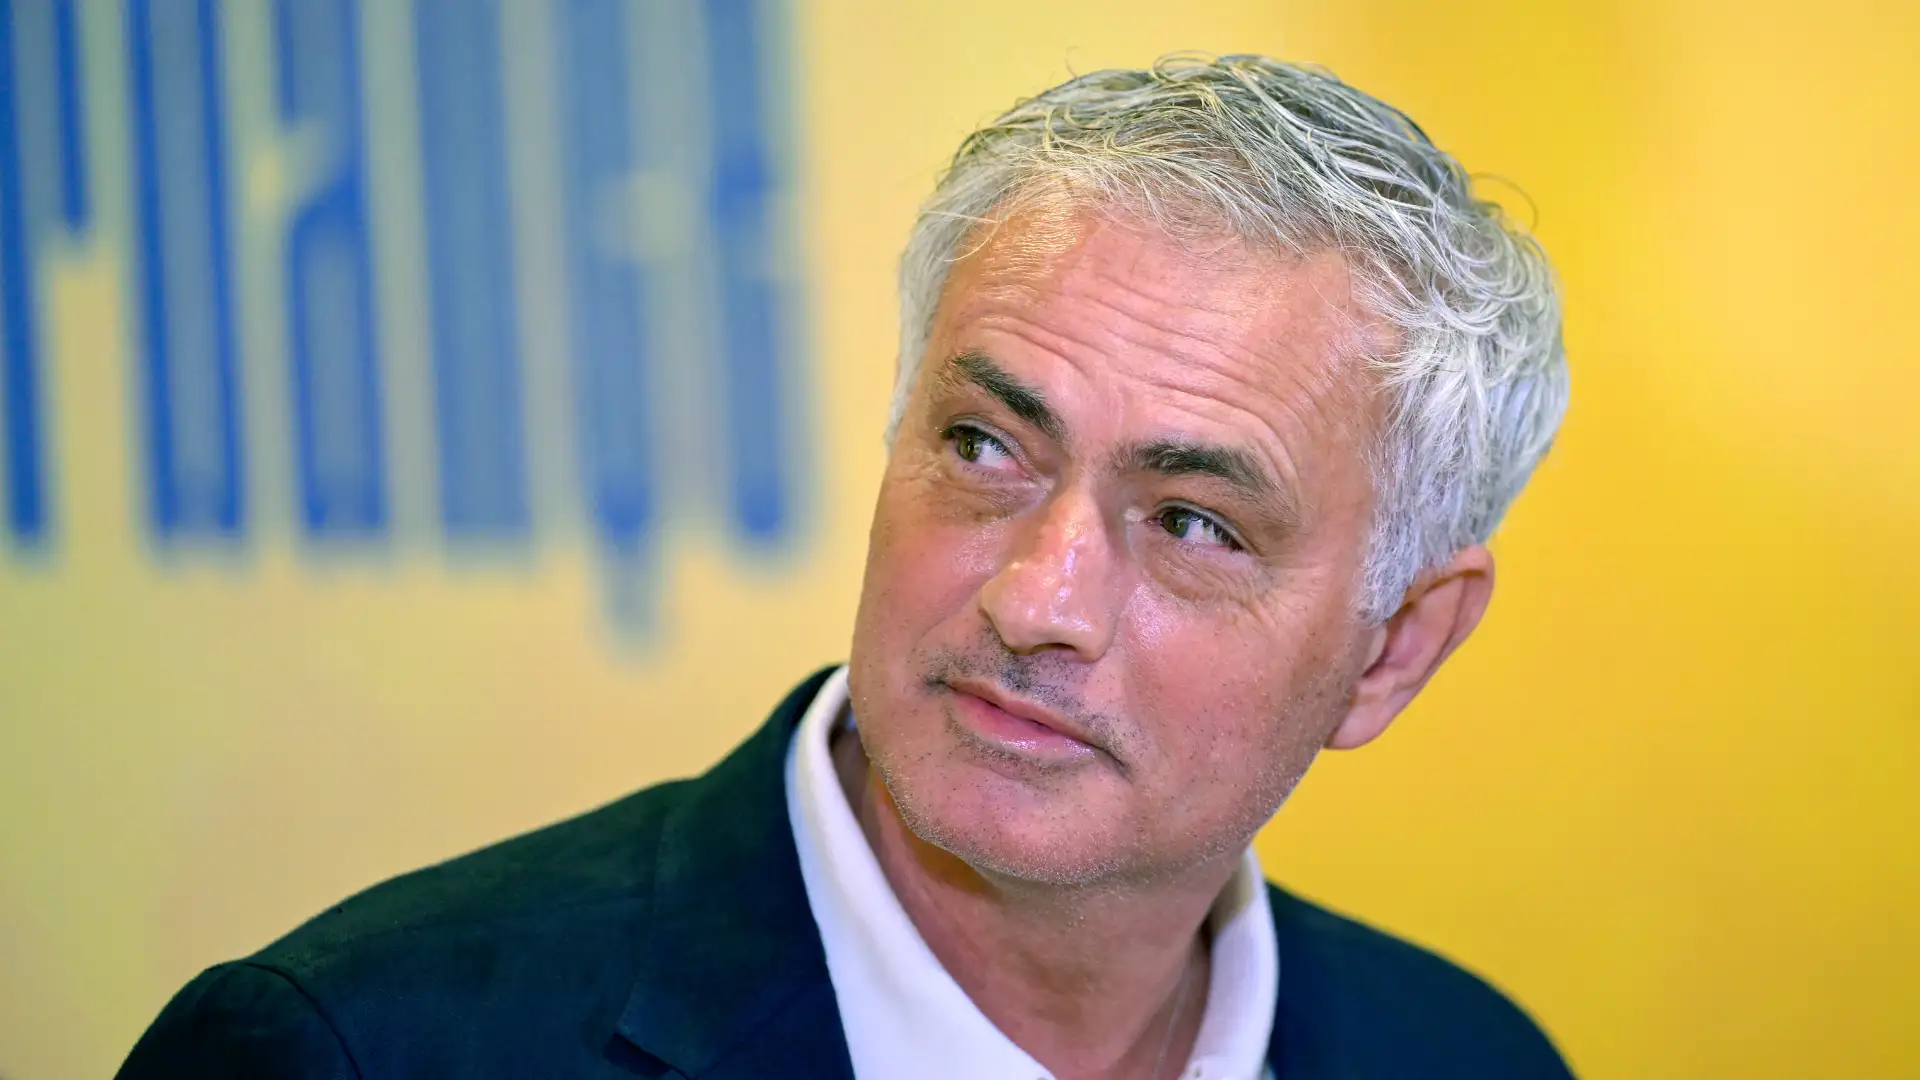 Jose Mourinho reveals he once almost broke his leg in the Chelsea dressing room as he labels ‘little guy’ Lionel Messi ‘uncoachable’